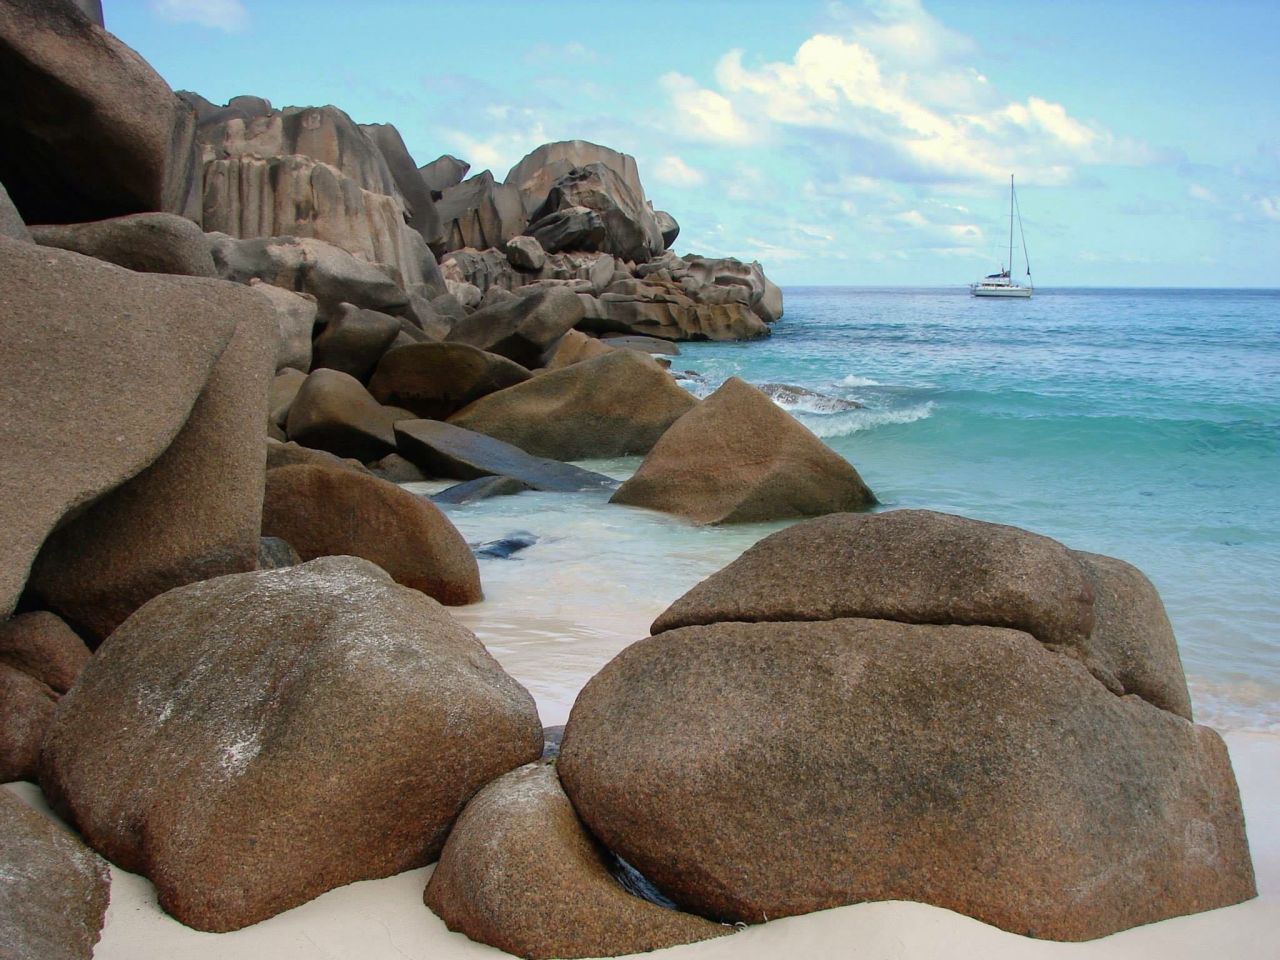 Made up of about 115 islands in the western Indian Ocean, the Seychelles are fascinating to geologists because some of the islands are composed of granite rock. "Those polished granite rocks are what give these islands that unique look," said iReporter <a href="http://ireport.cnn.com/docs/DOC-1222462">Rob MacRiner</a>. The sailboat MacRiner was skippering is anchored in the distance. 